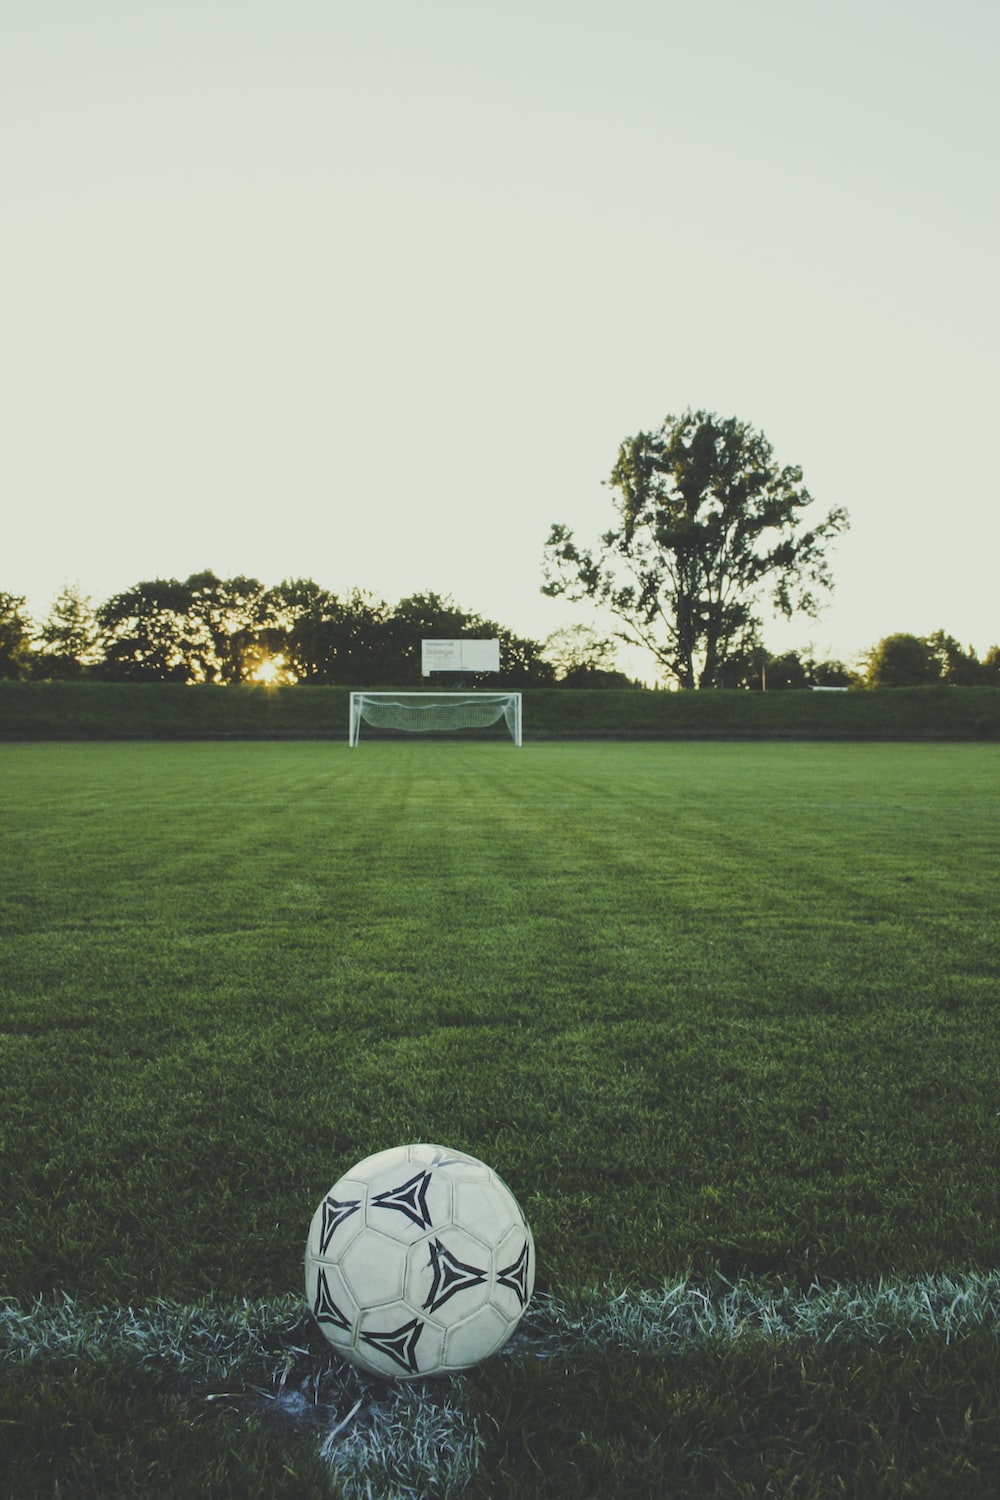 Football Goal Picture. Download Free Image